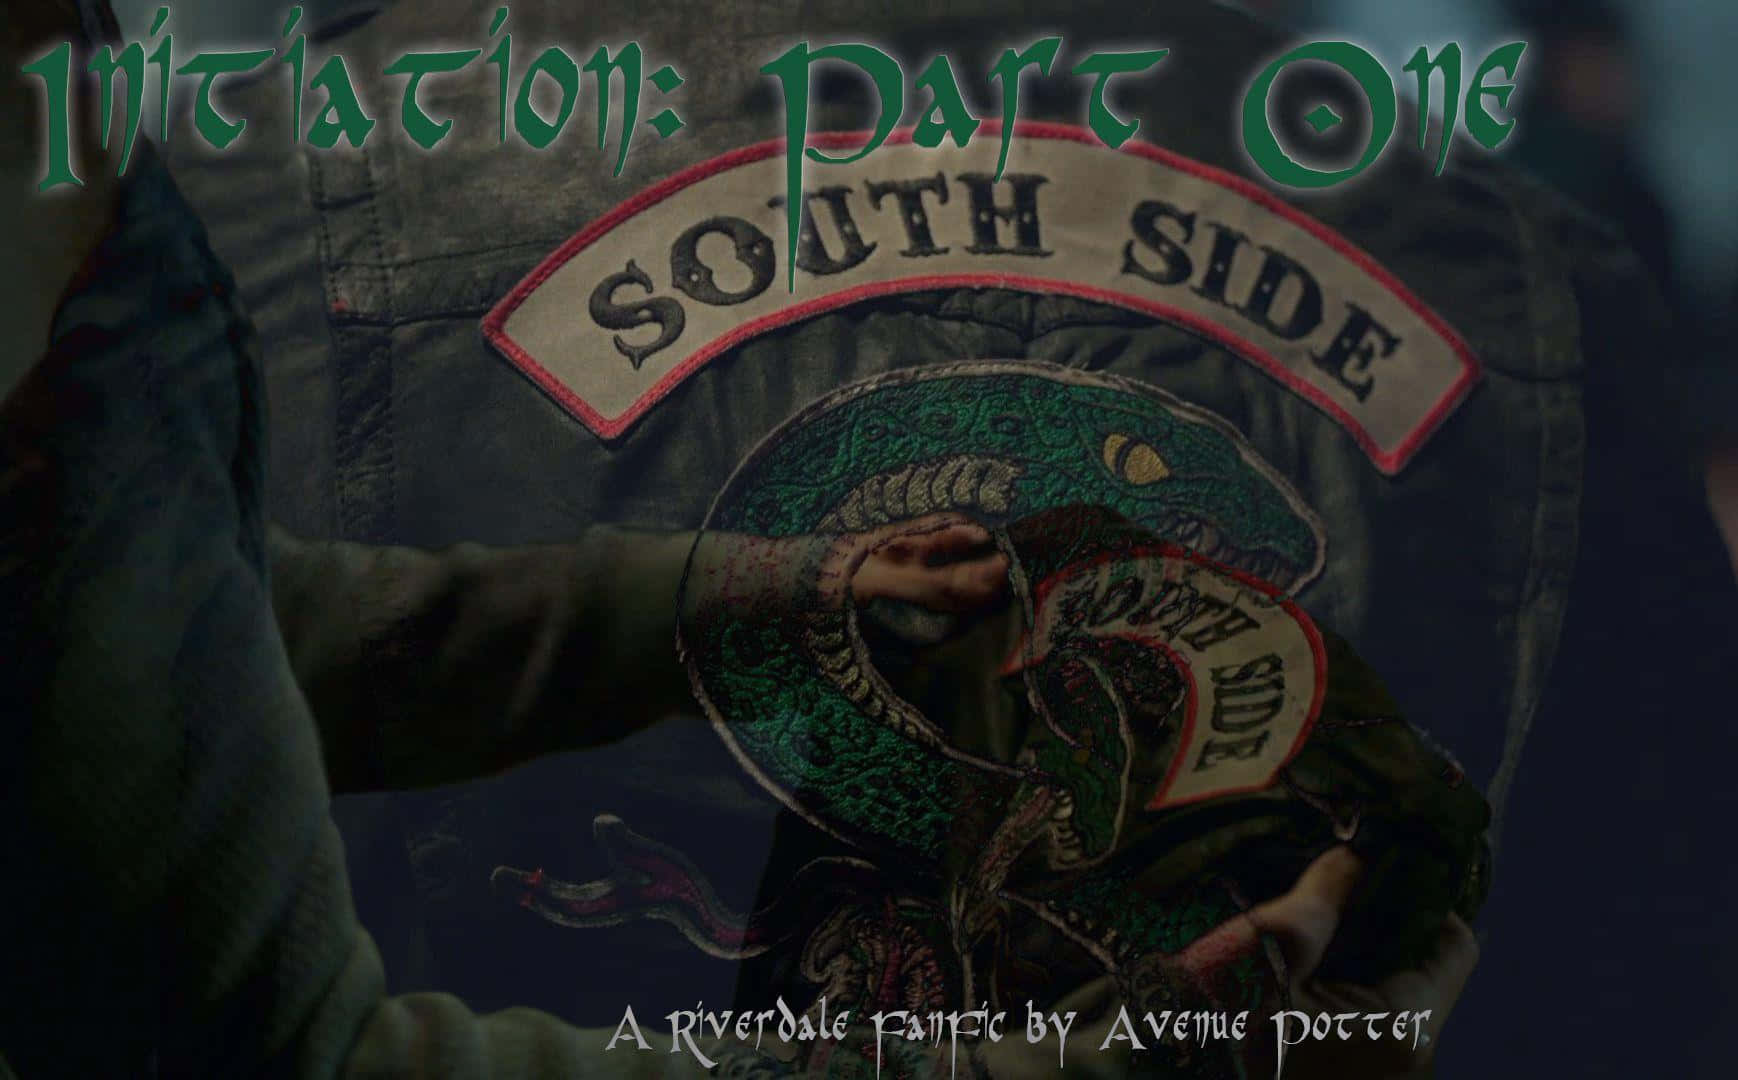 Join Southside Serpents and discover a whole new world. Wallpaper